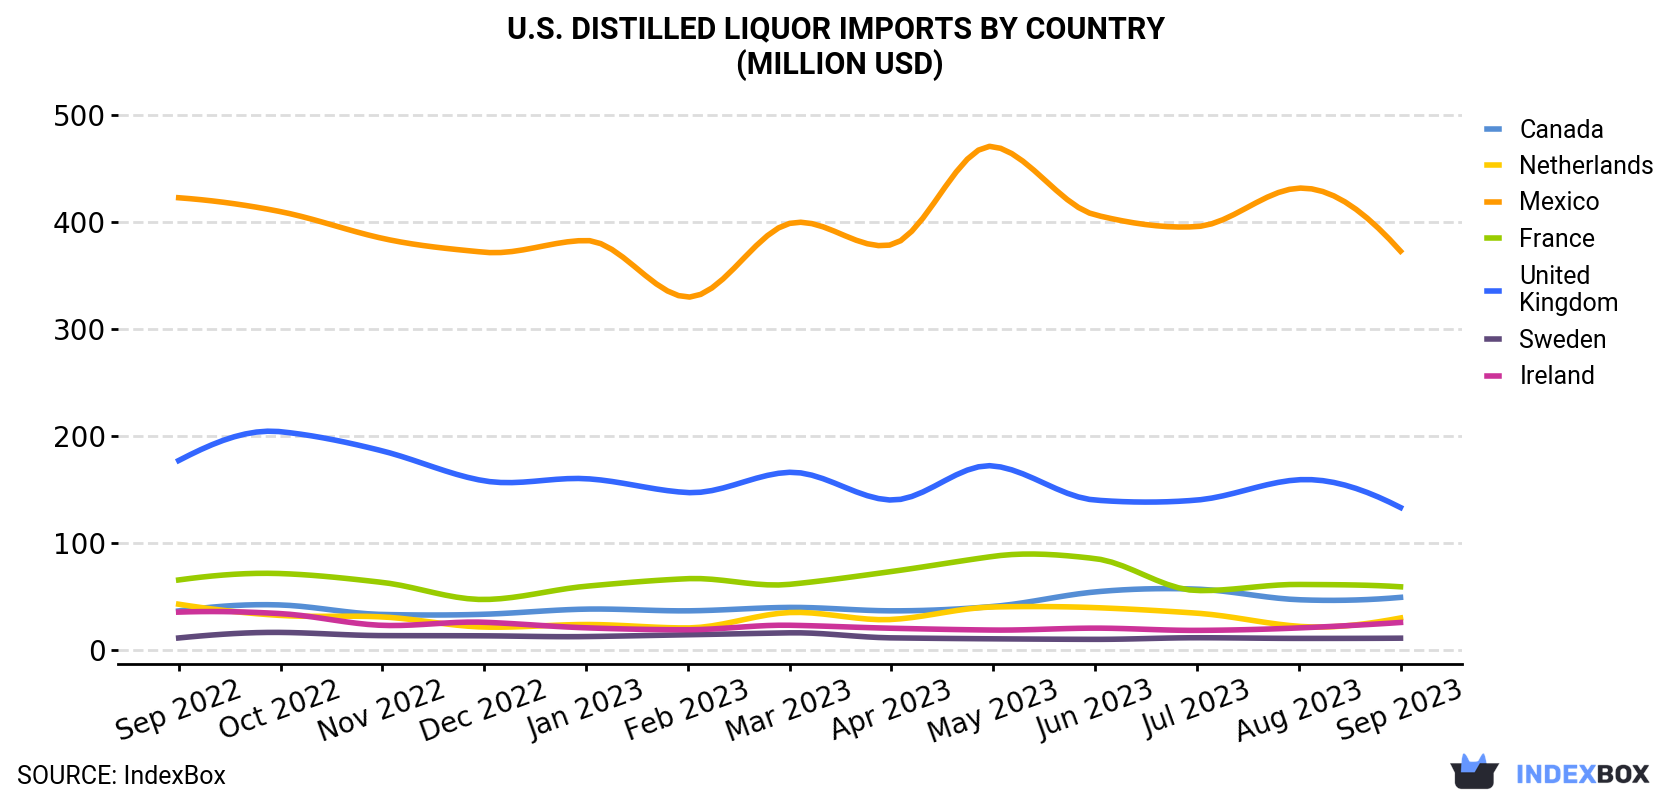 U.S. Distilled Liquor Imports By Country (Million USD)